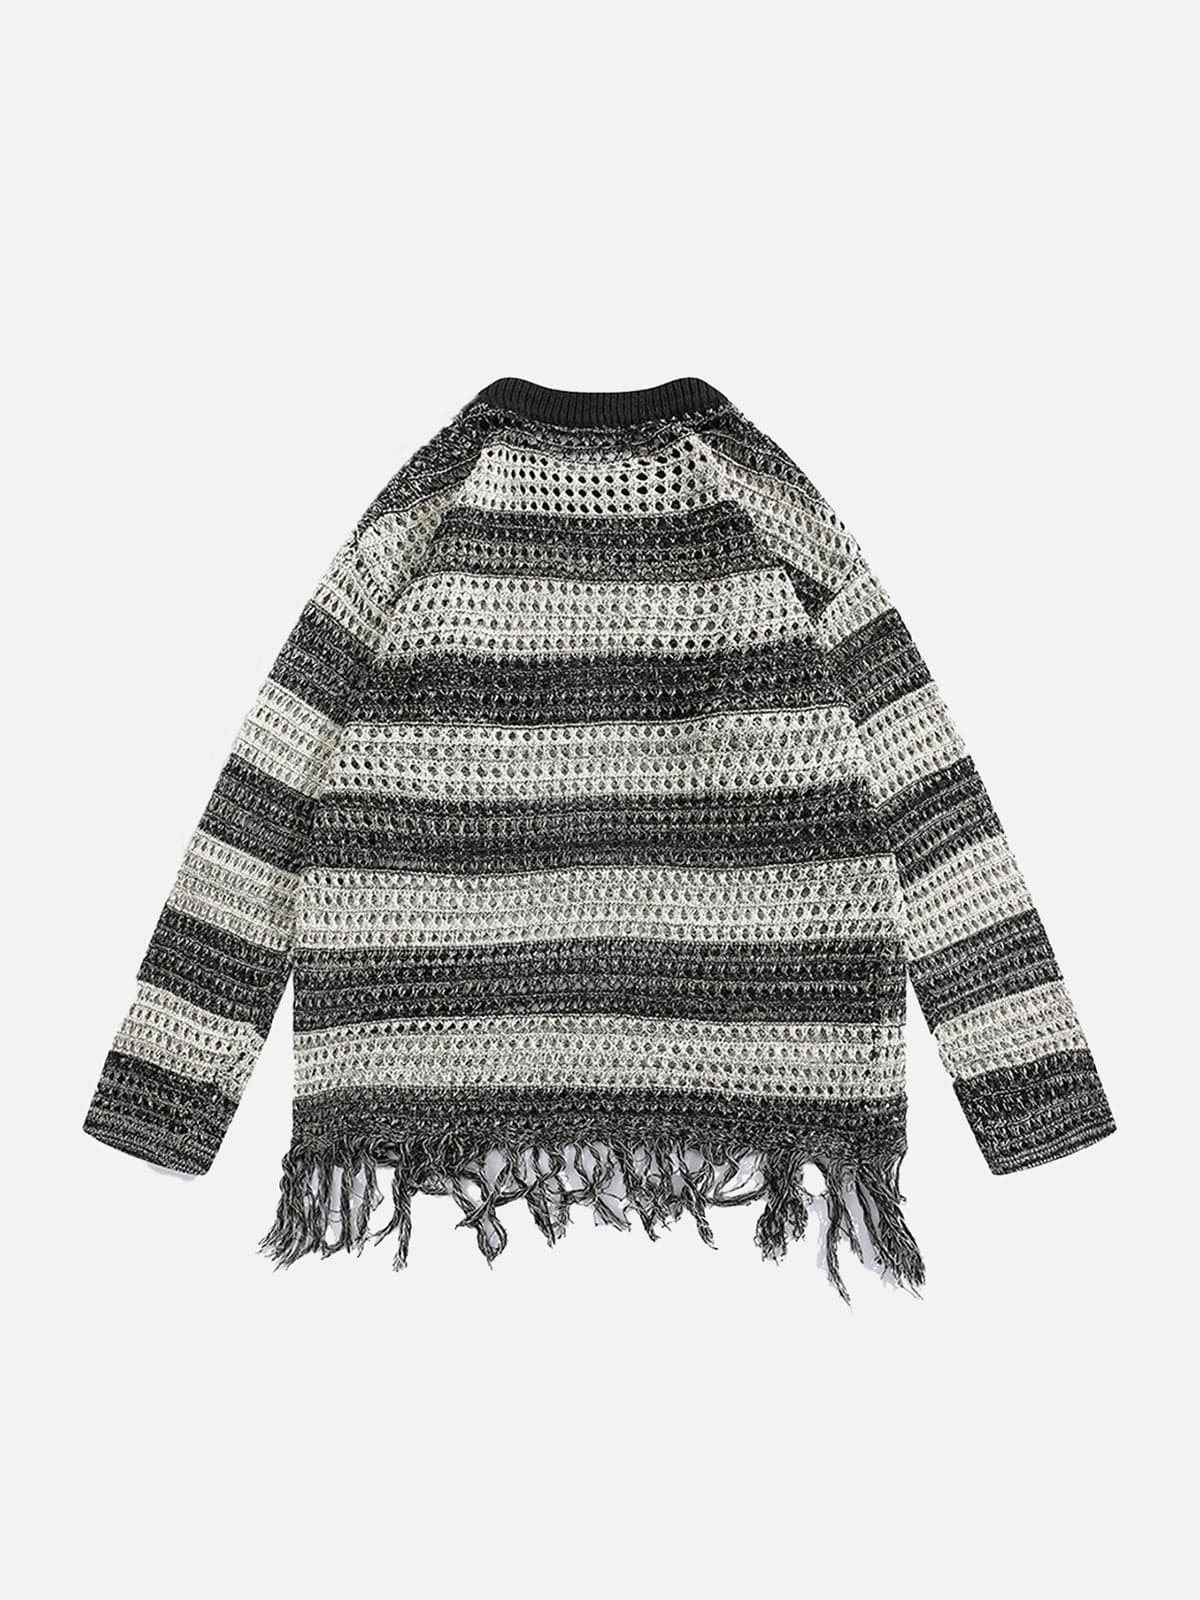 NEV Hollow Fringed Sweater